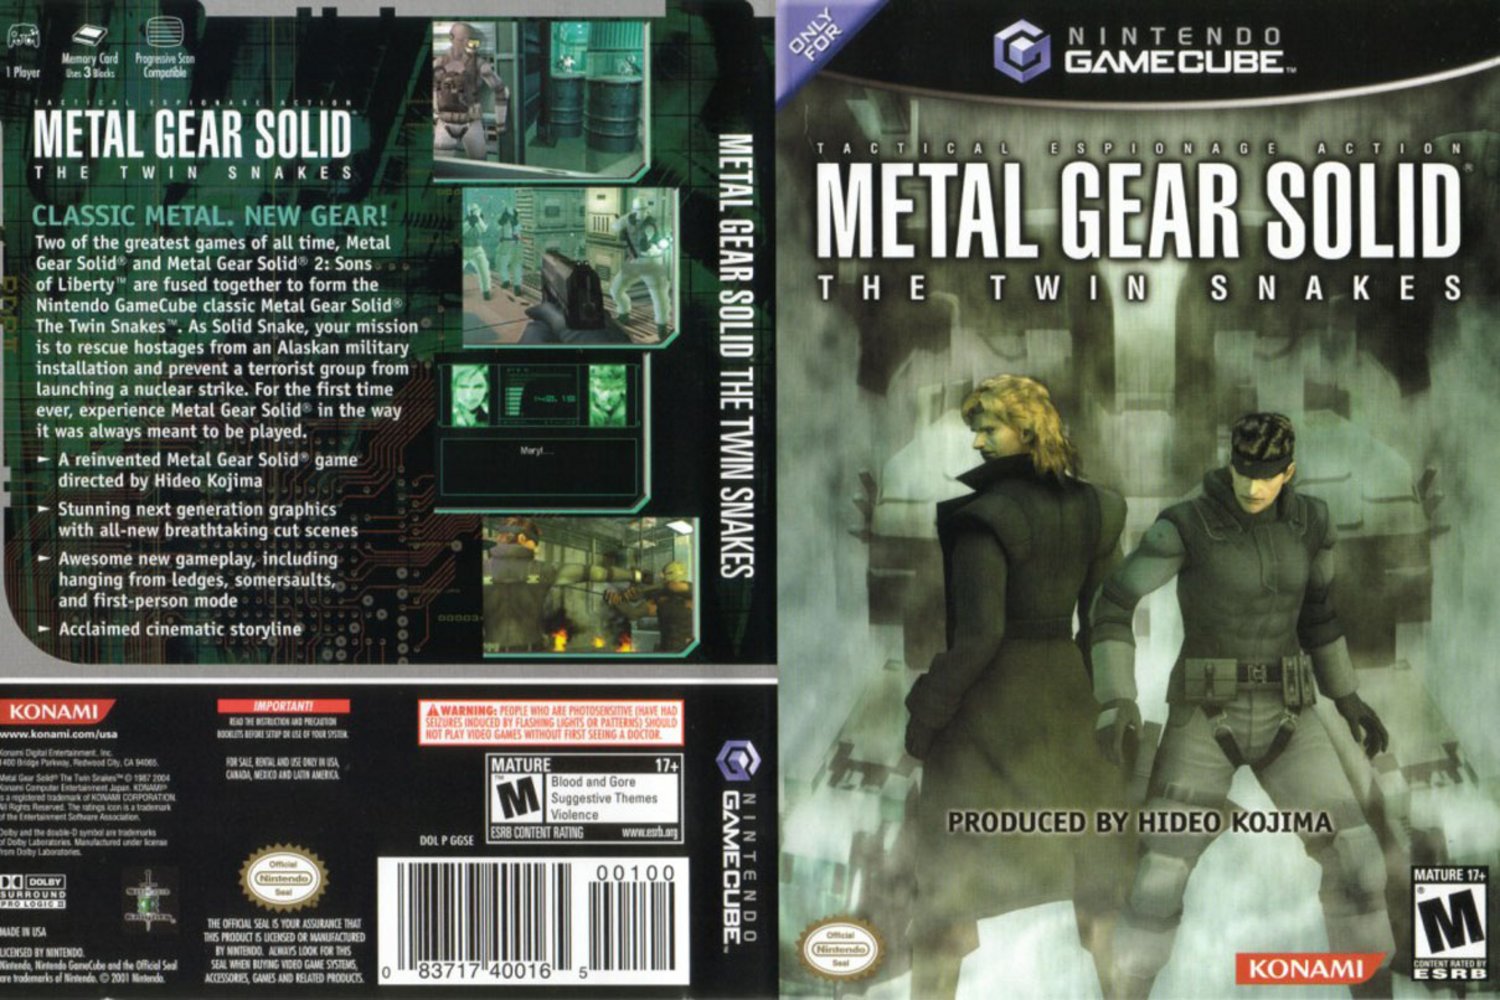 Metal Gear Solid 3 Subsistence Ps2 Torrent Iso Wii